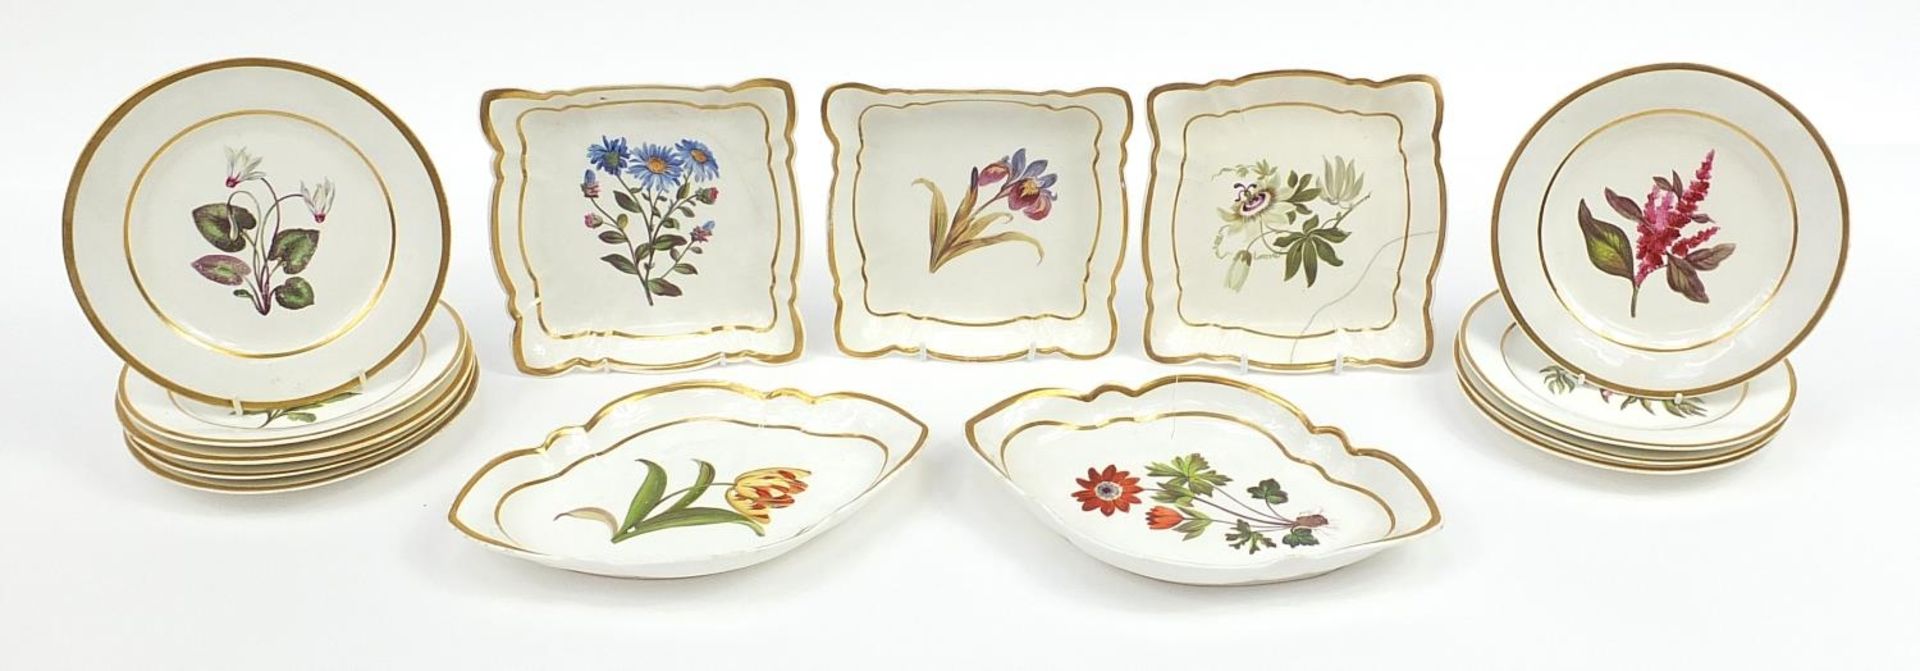 Early 19th century Coalport botanical porcelain service comprising nine plates and five dishes hand